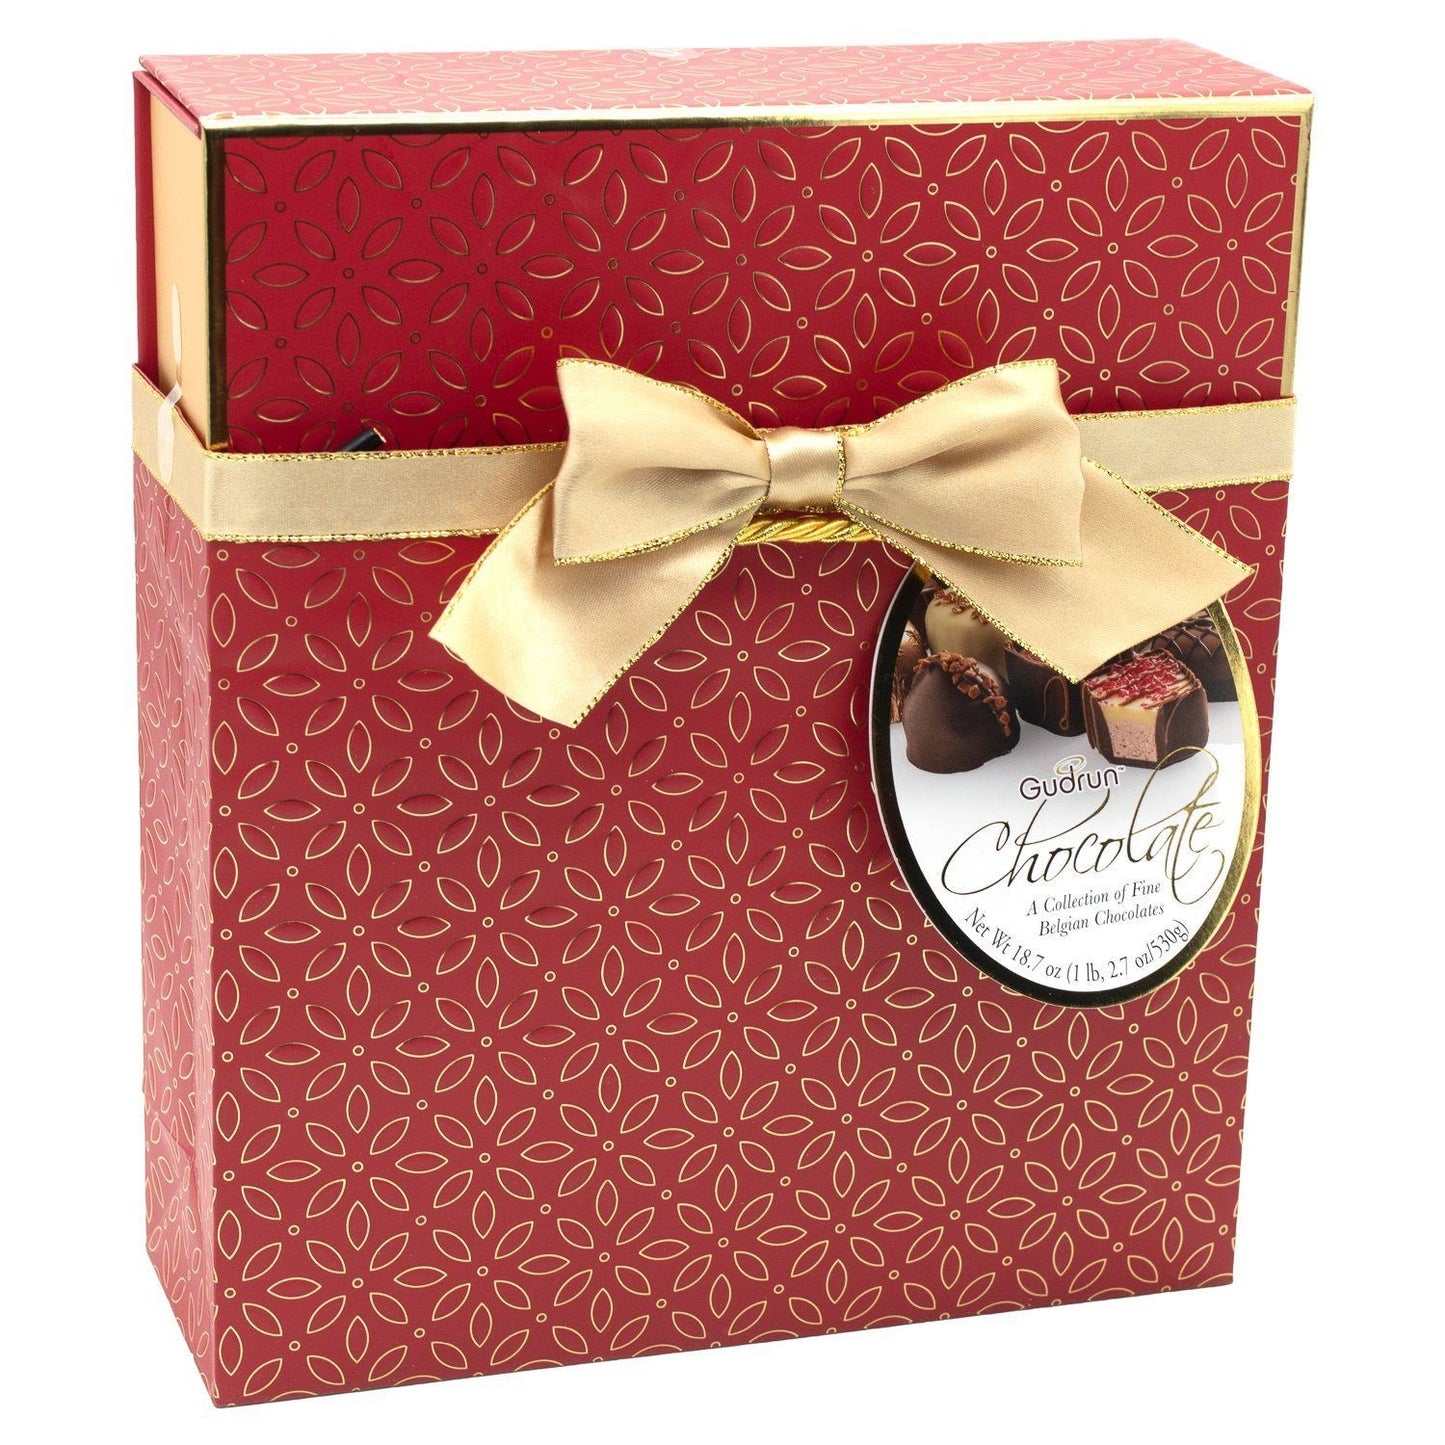 Gudrun Collection of Fine Belgian Chocolates Best Gift this Holidays - Green Box